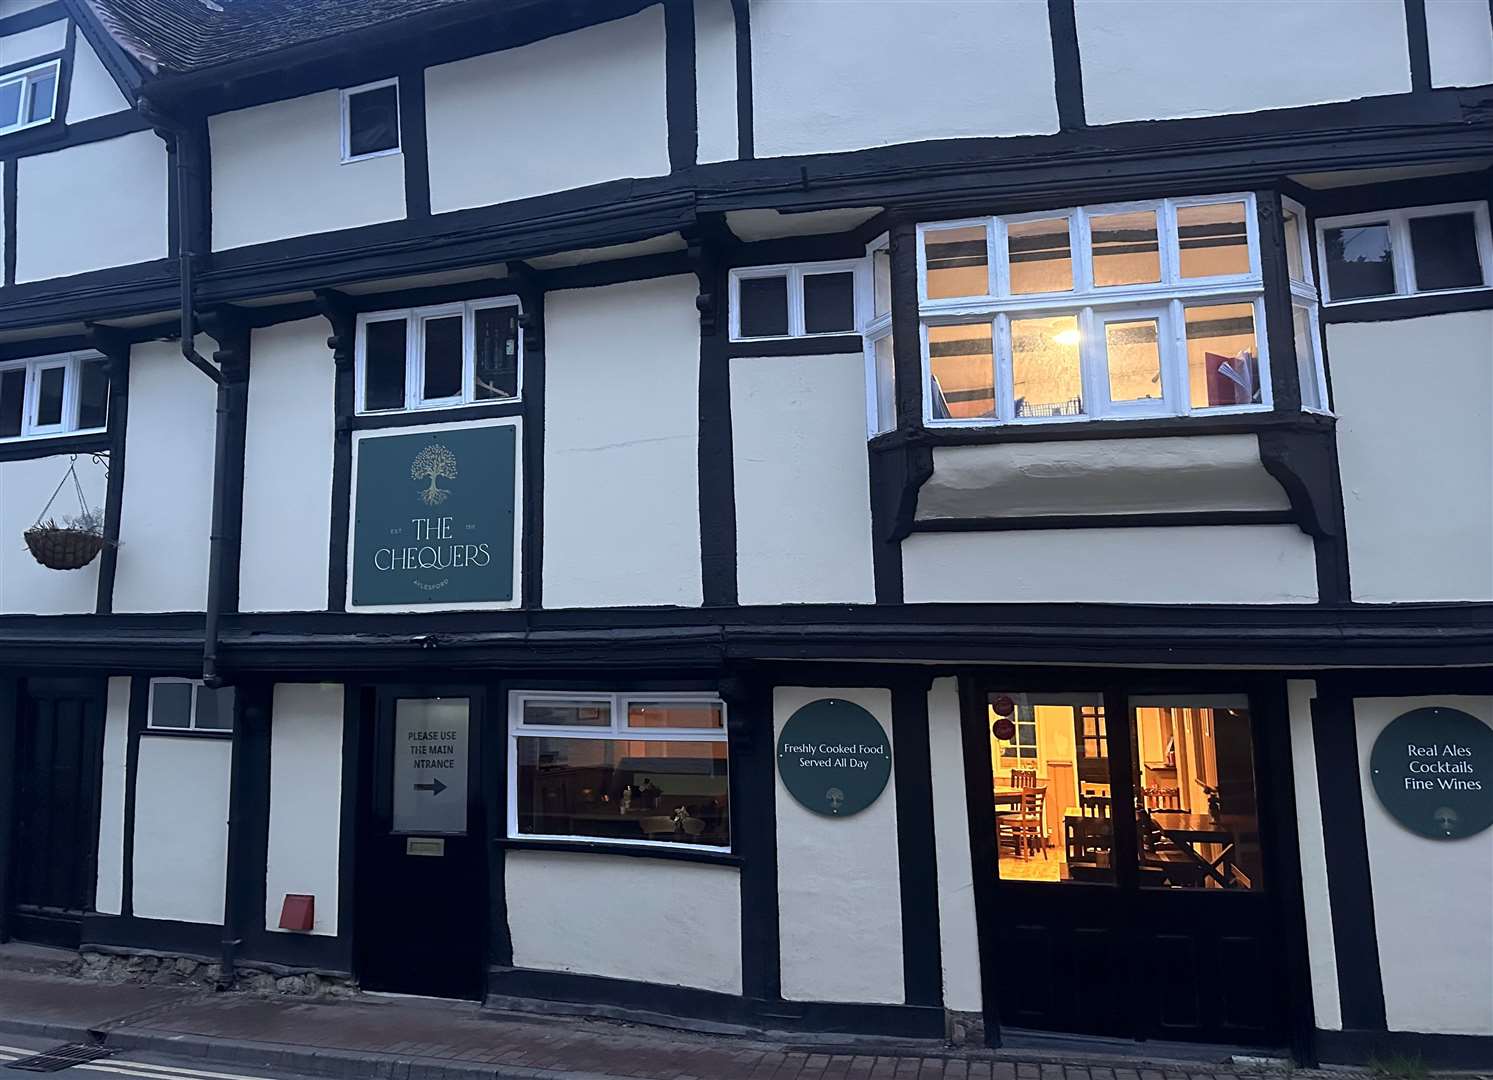 The Chequers Inn, Aylesford, has shut suddenly after the death of one of its co-owners